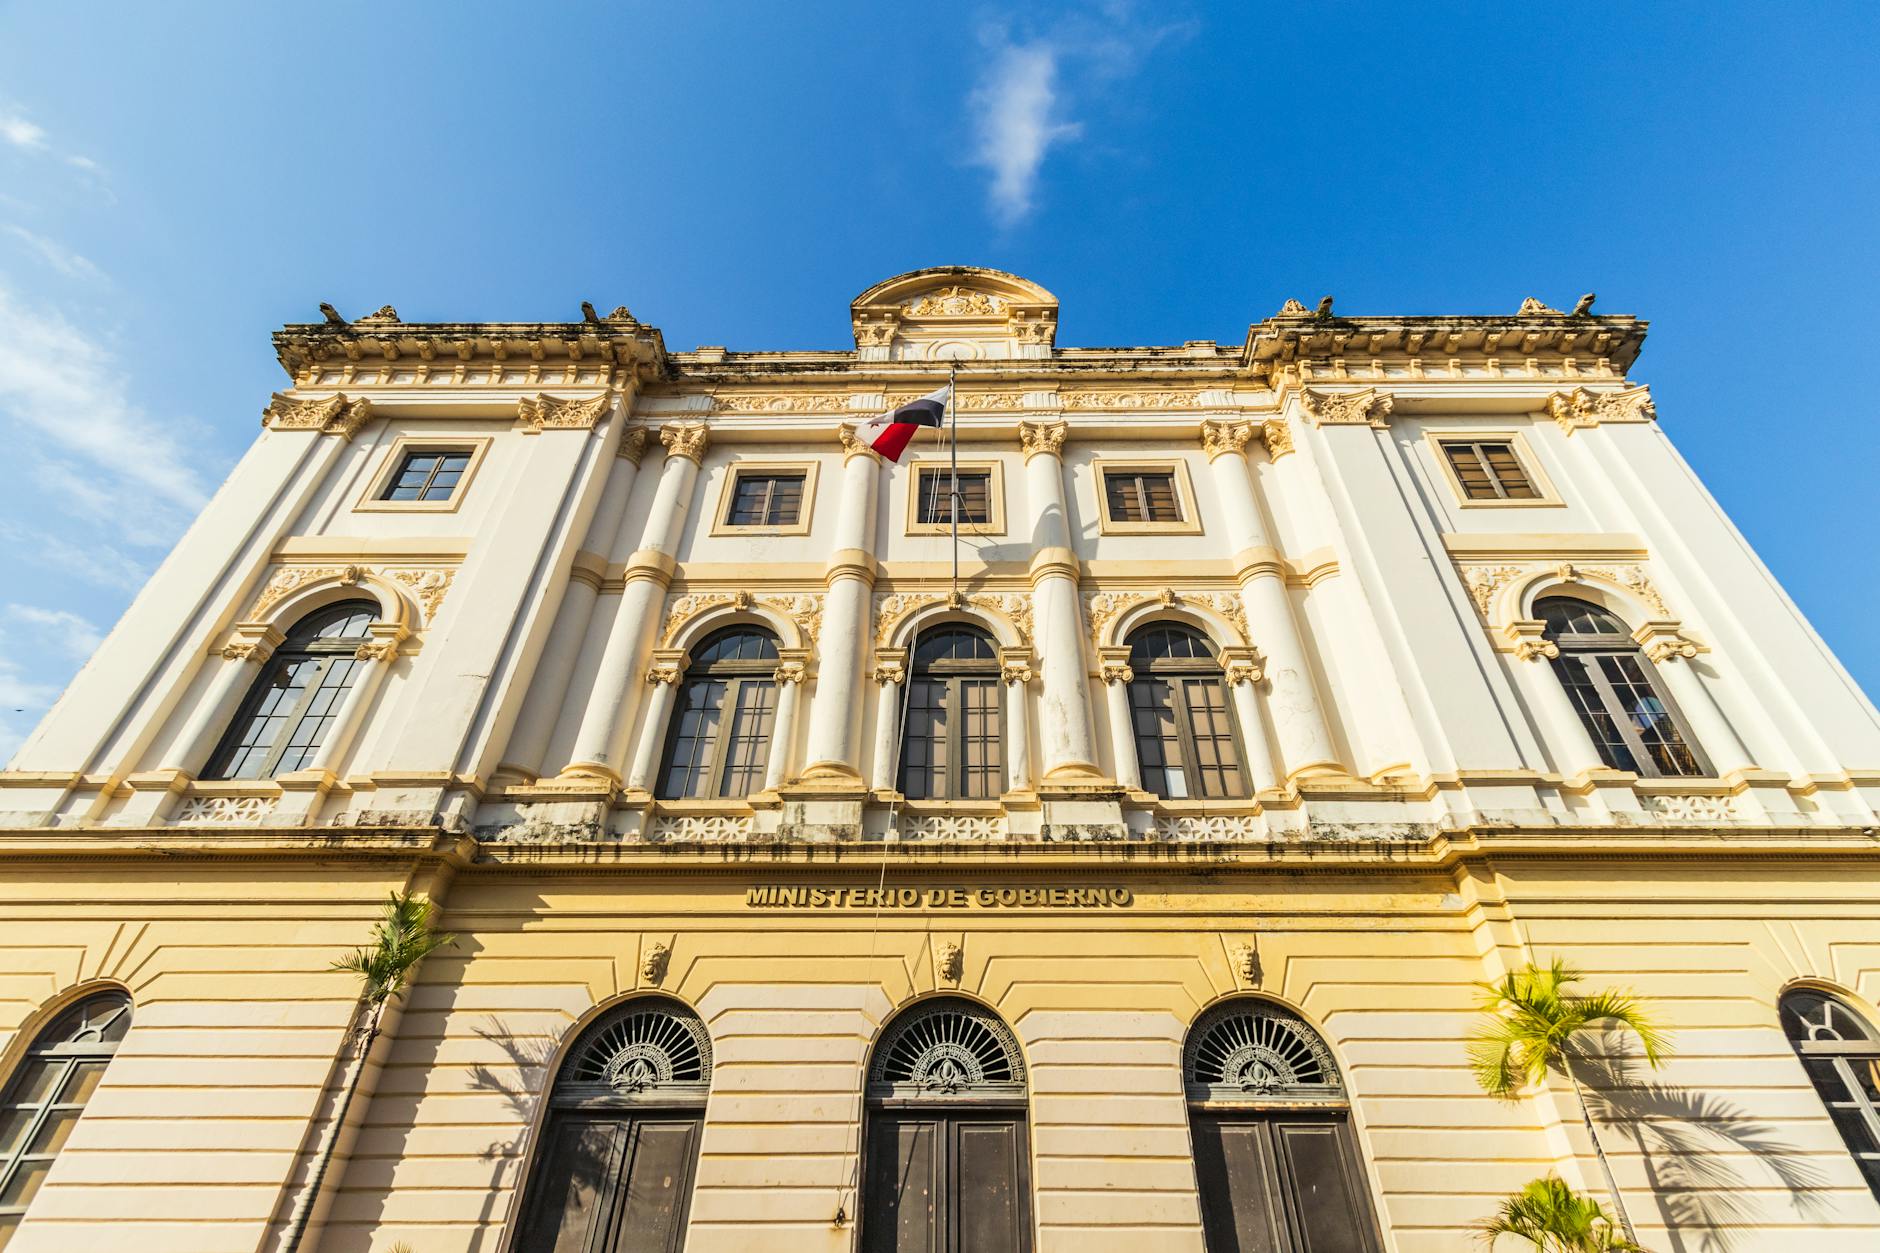 historic ministry of government building in casco viejo alongside the national theater